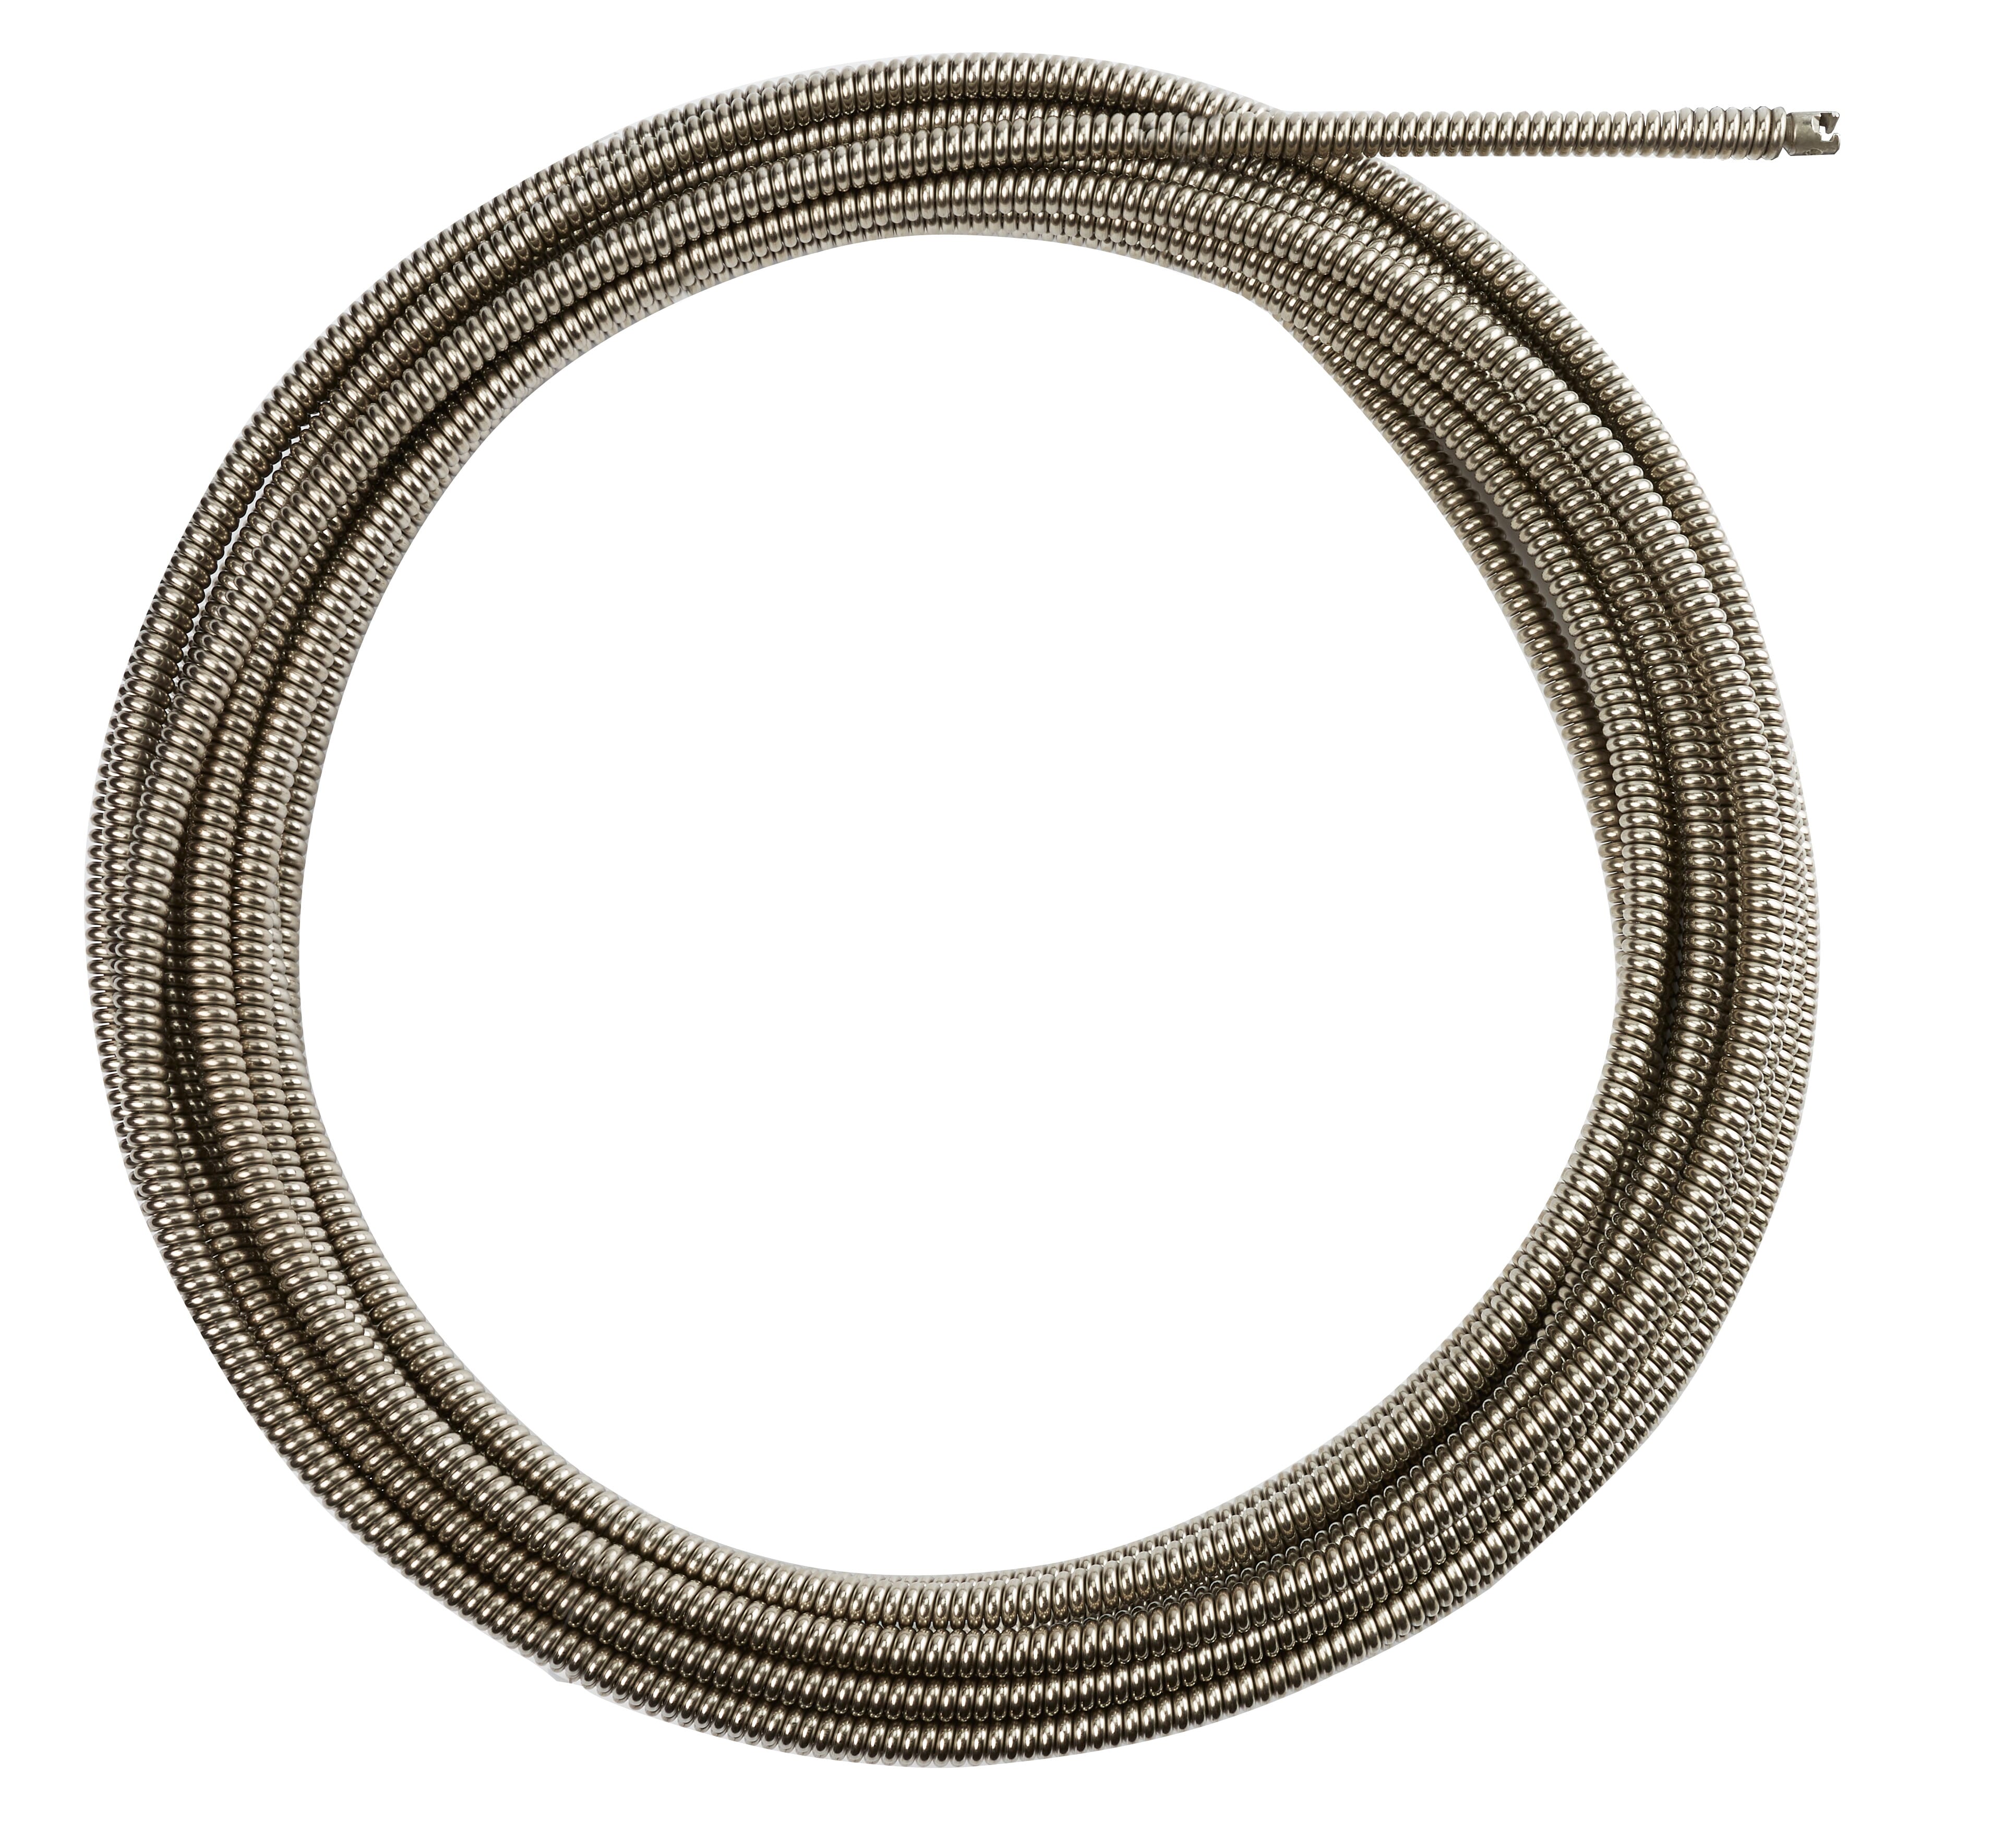 Milwaukee® 48-53-2774 Inner Core Coupling Drain Cleaning Cable, 1/2 in, Steel, For Use With Drain Cleaning Machines, 1-1/4 to 2-1/2 in Drain Line